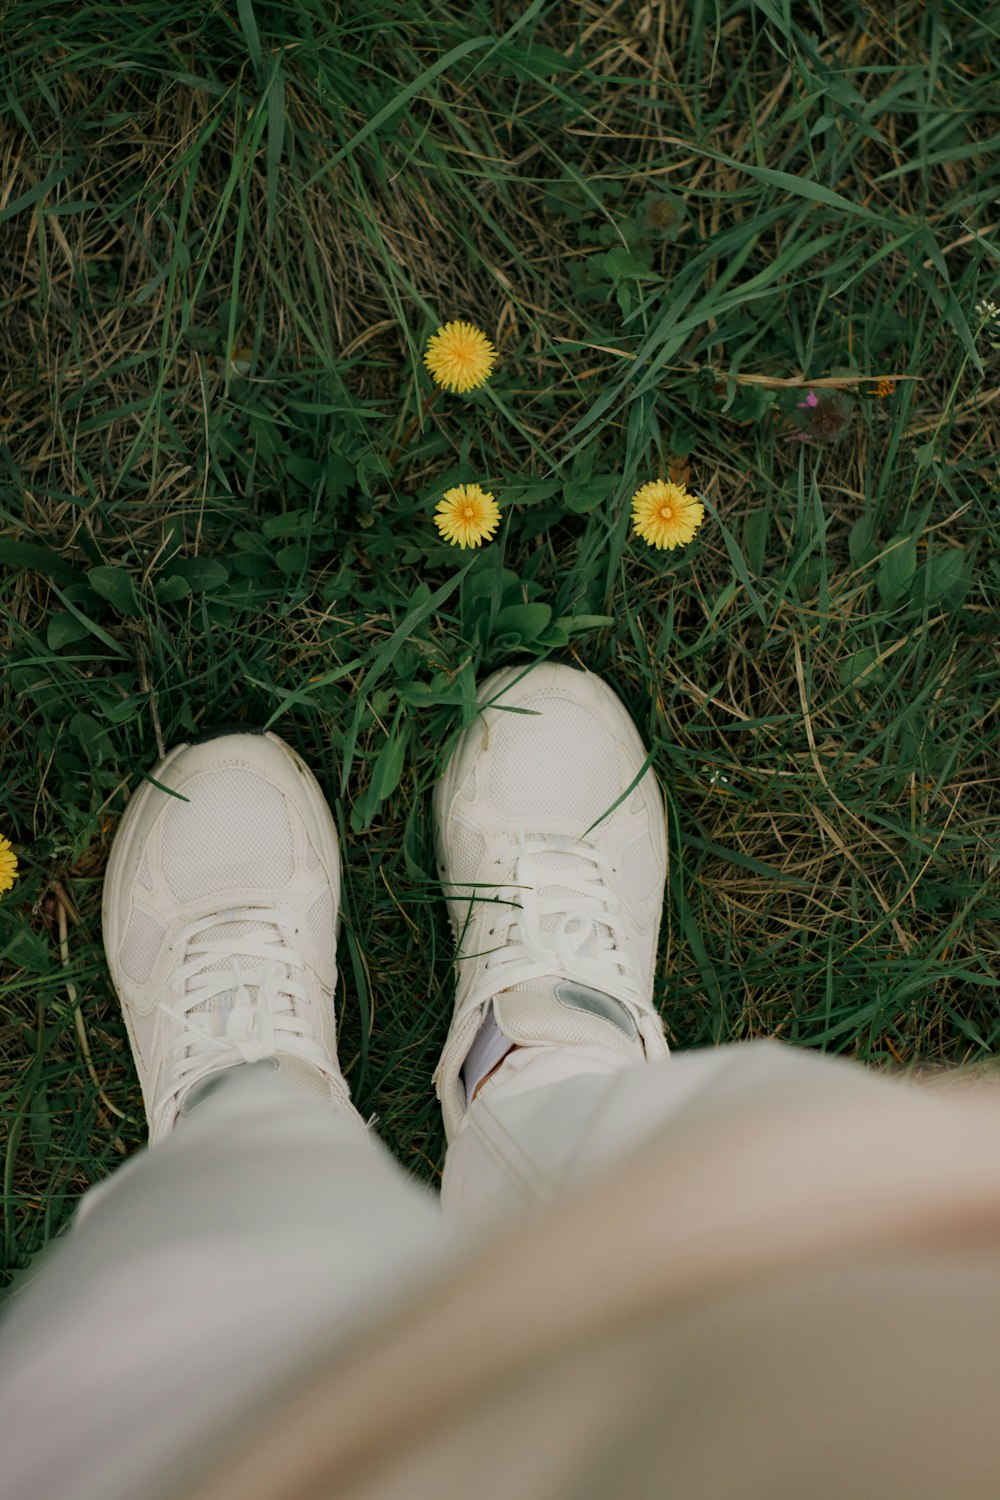 a person wearing white shoes standing in the grass